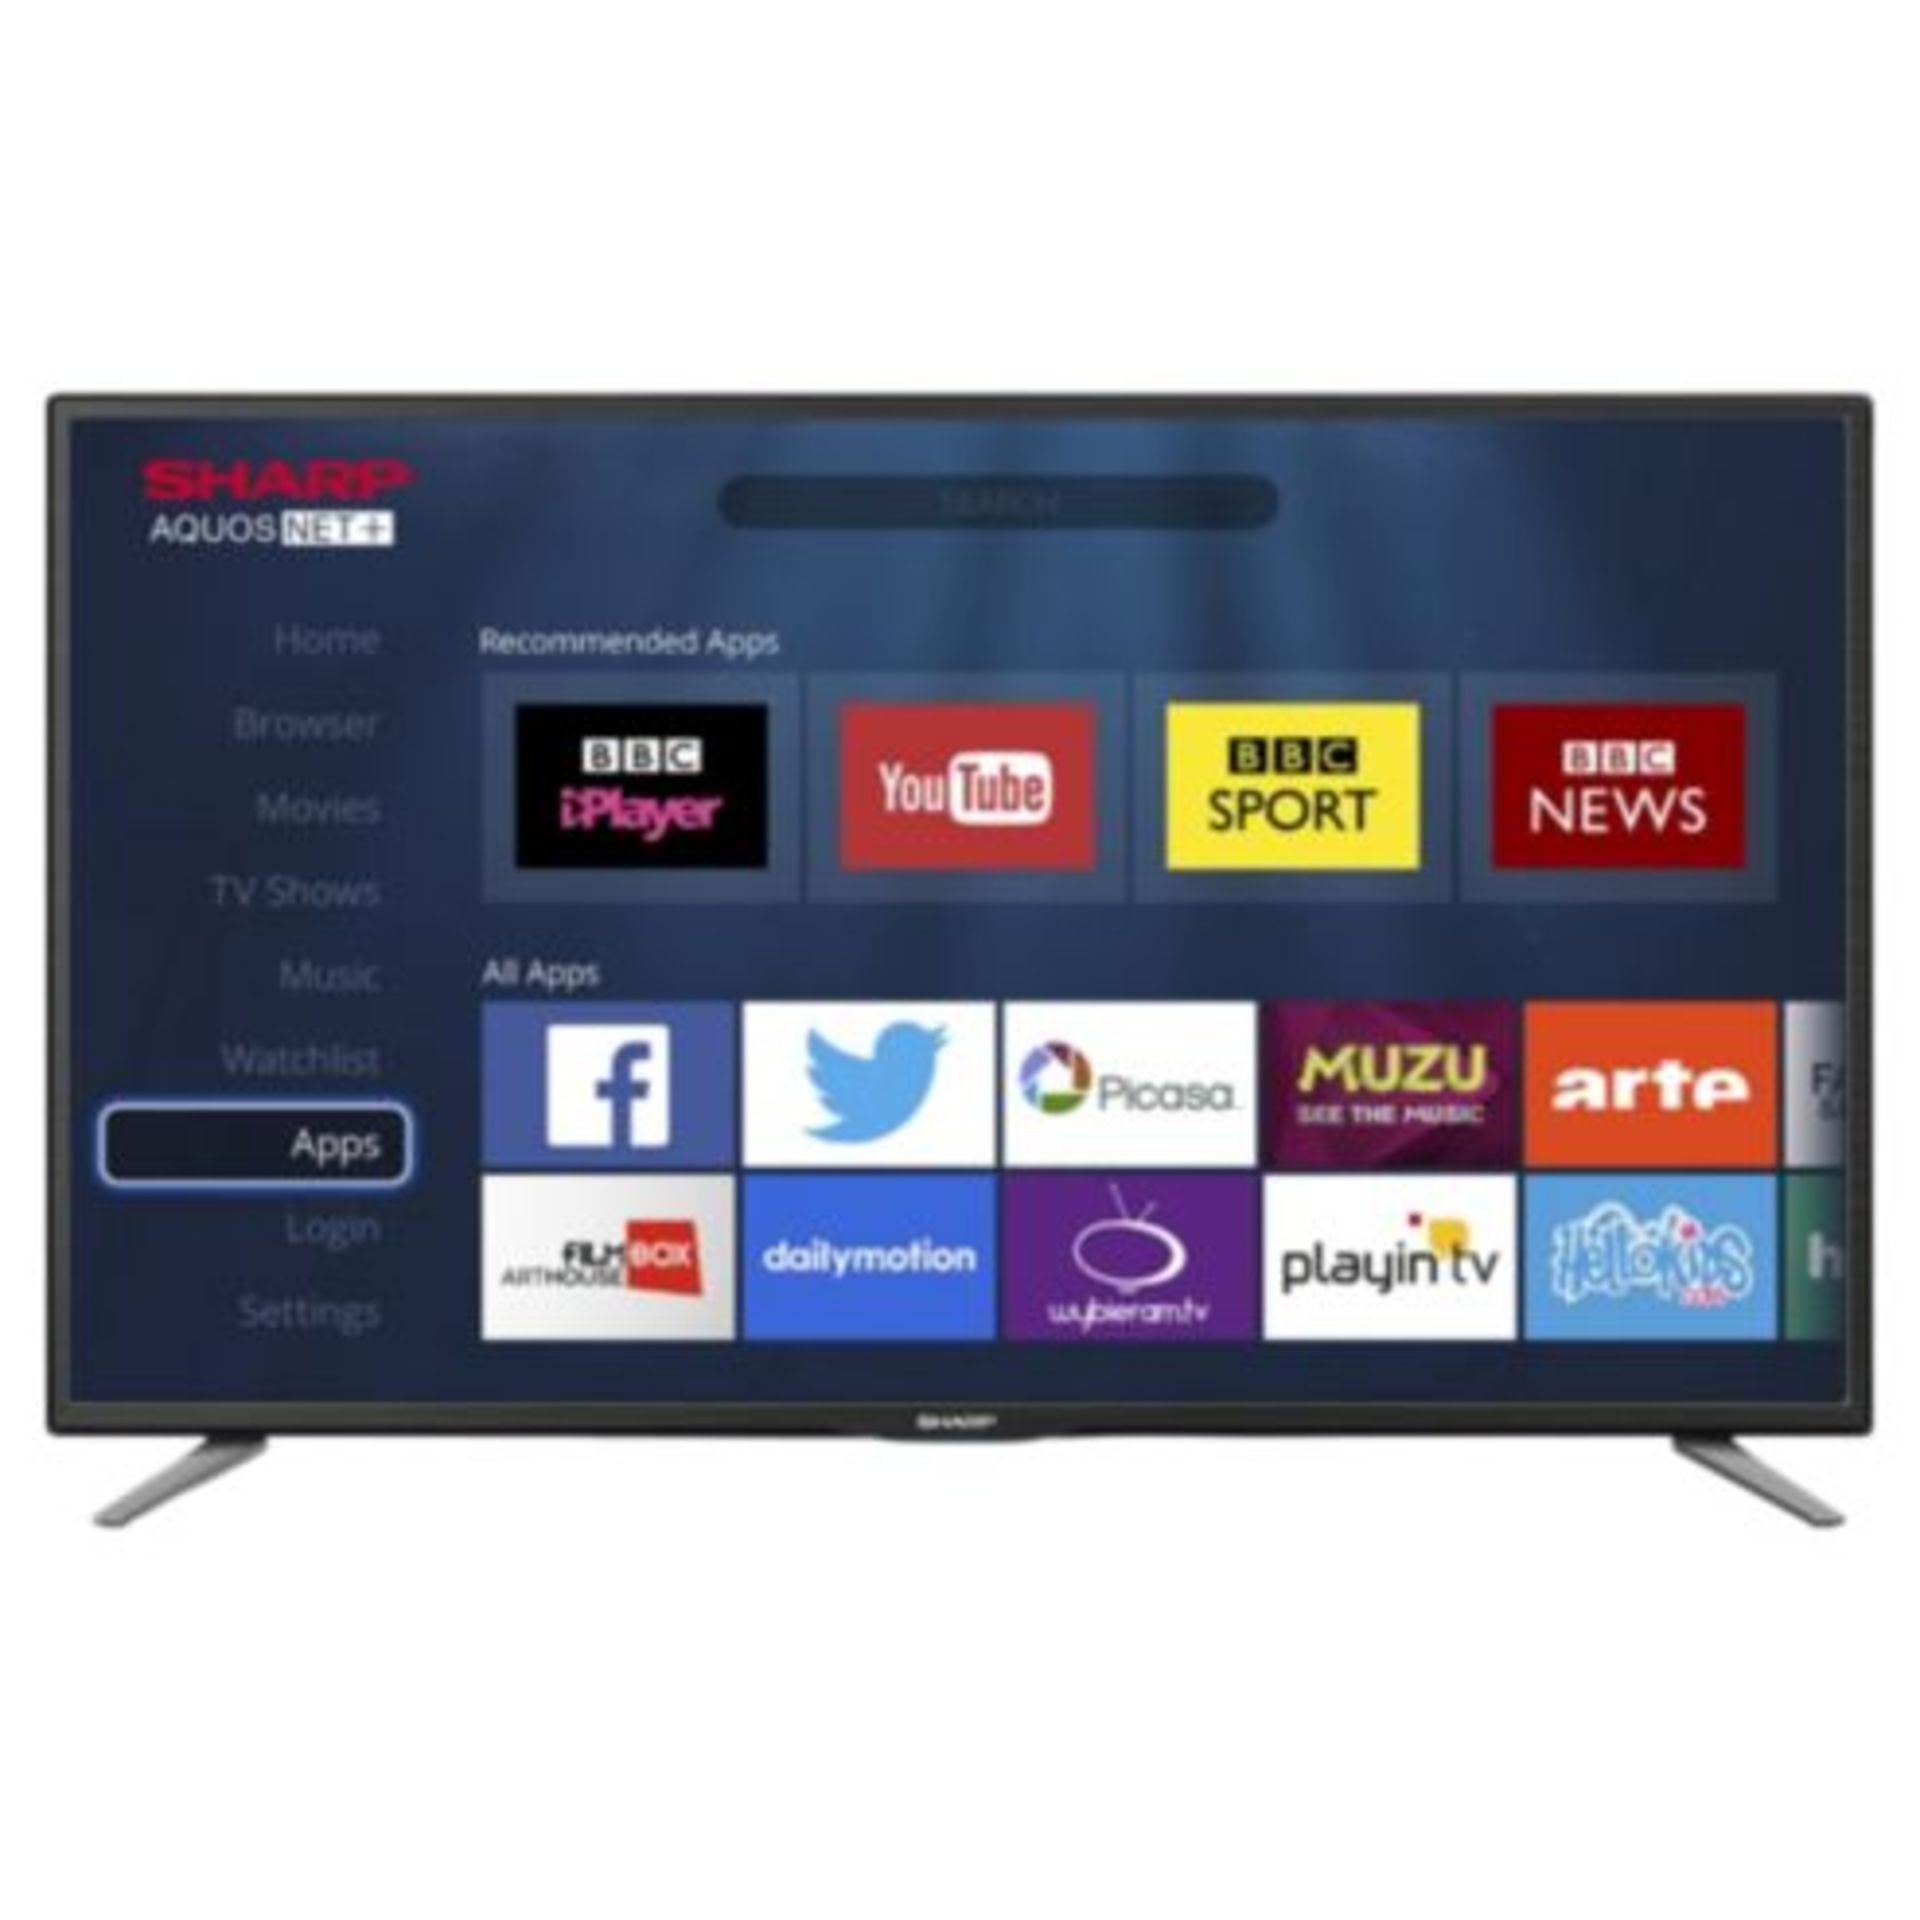 V Brand New Sharp 49" Widescreen Full HD 1080p LED LCD Smart TV With Freeview HD - Satellite HD